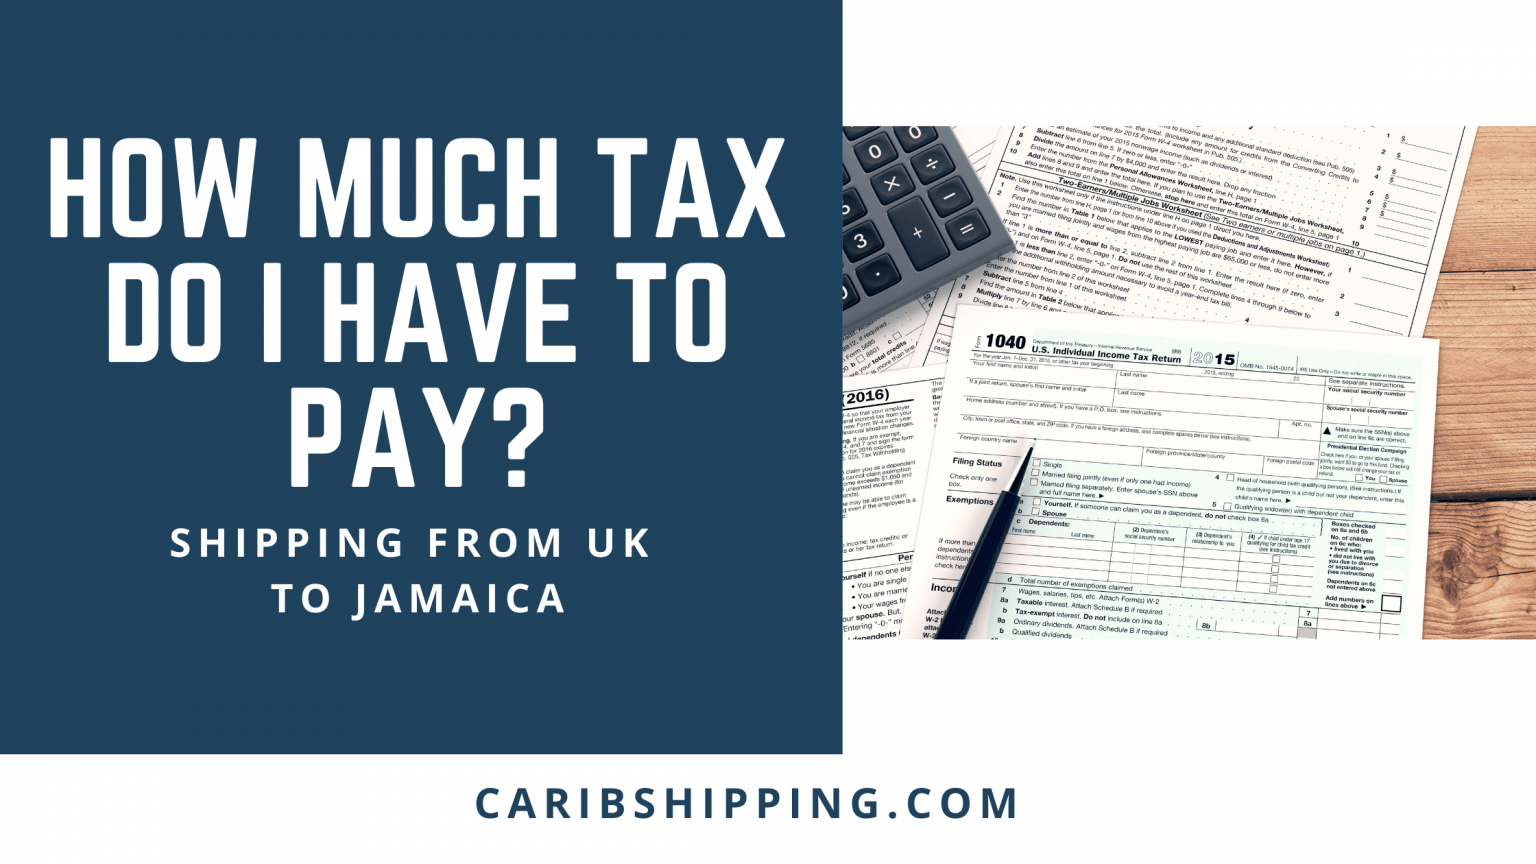 How much tax do I have to pay?